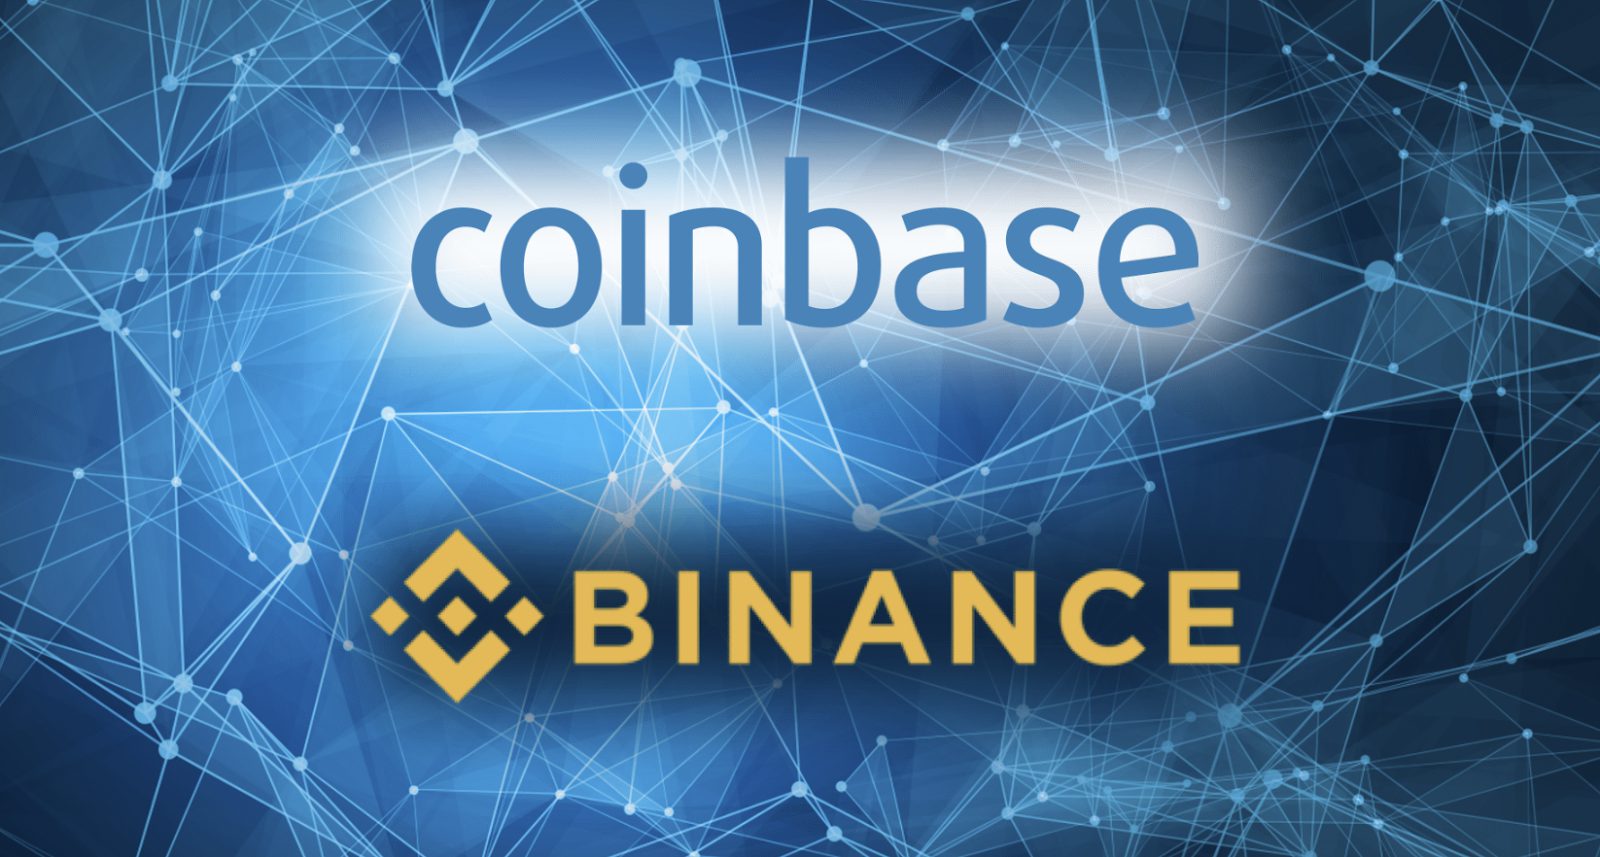 5 New Binance & Coinbase Cryptocurrency Listings to Watch